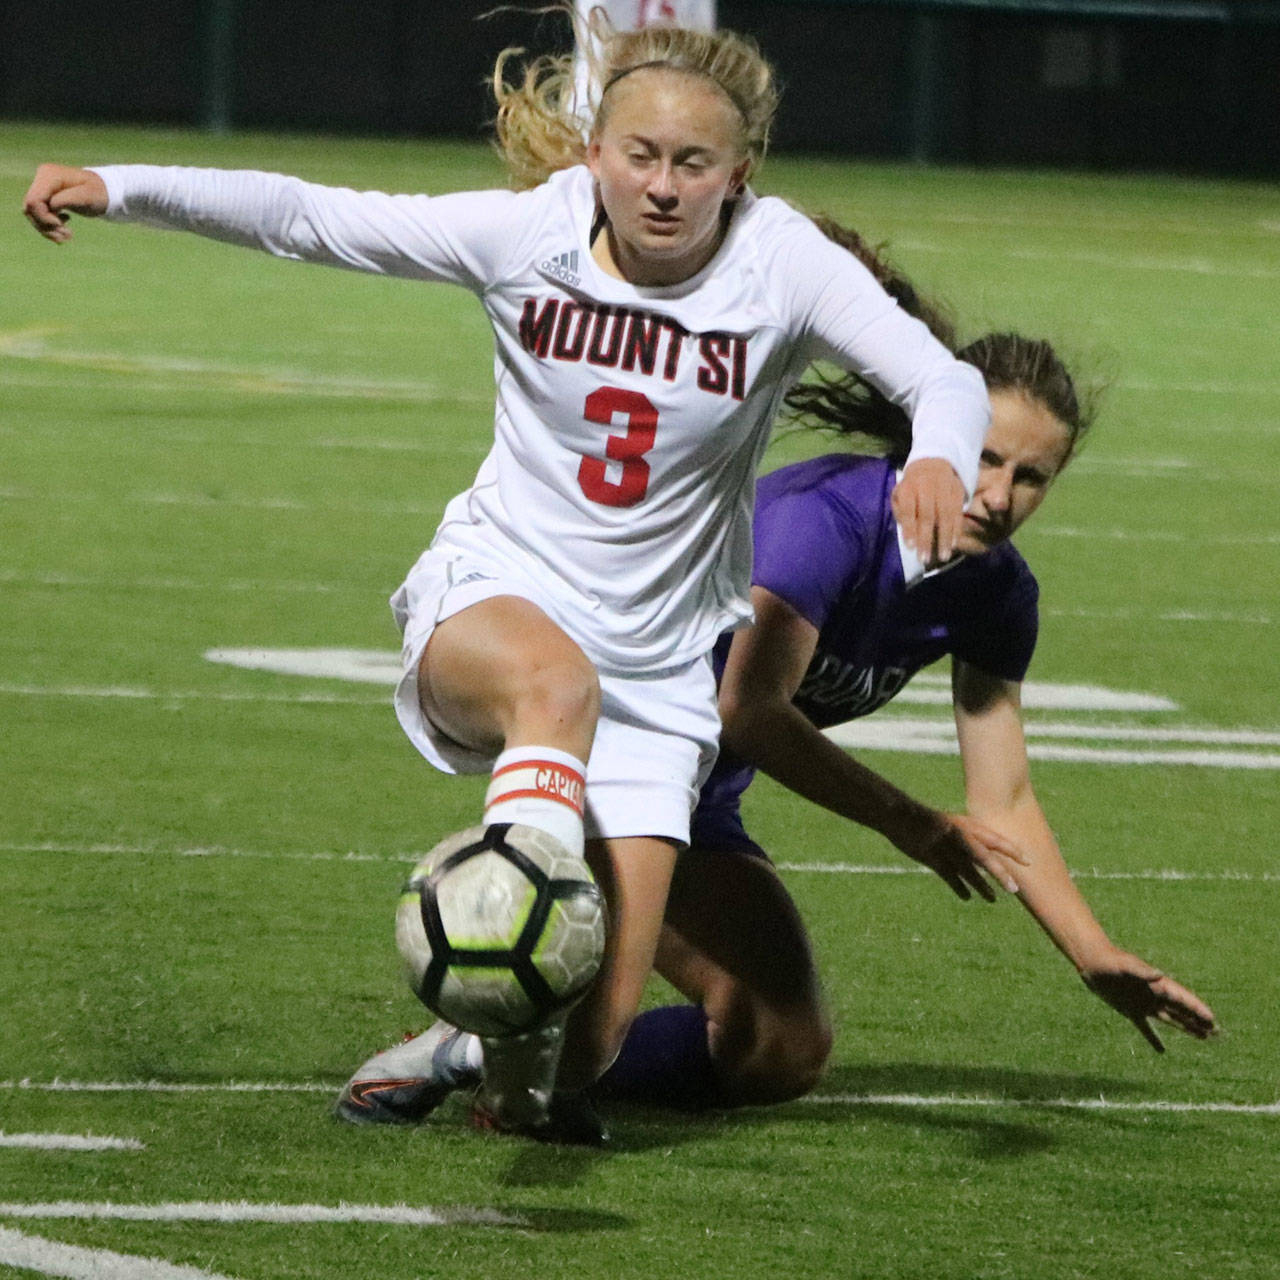 Mount Si’s Sarah Creighton battles a North Creek player for the ball this season. Andy Nystrom/ staff photo